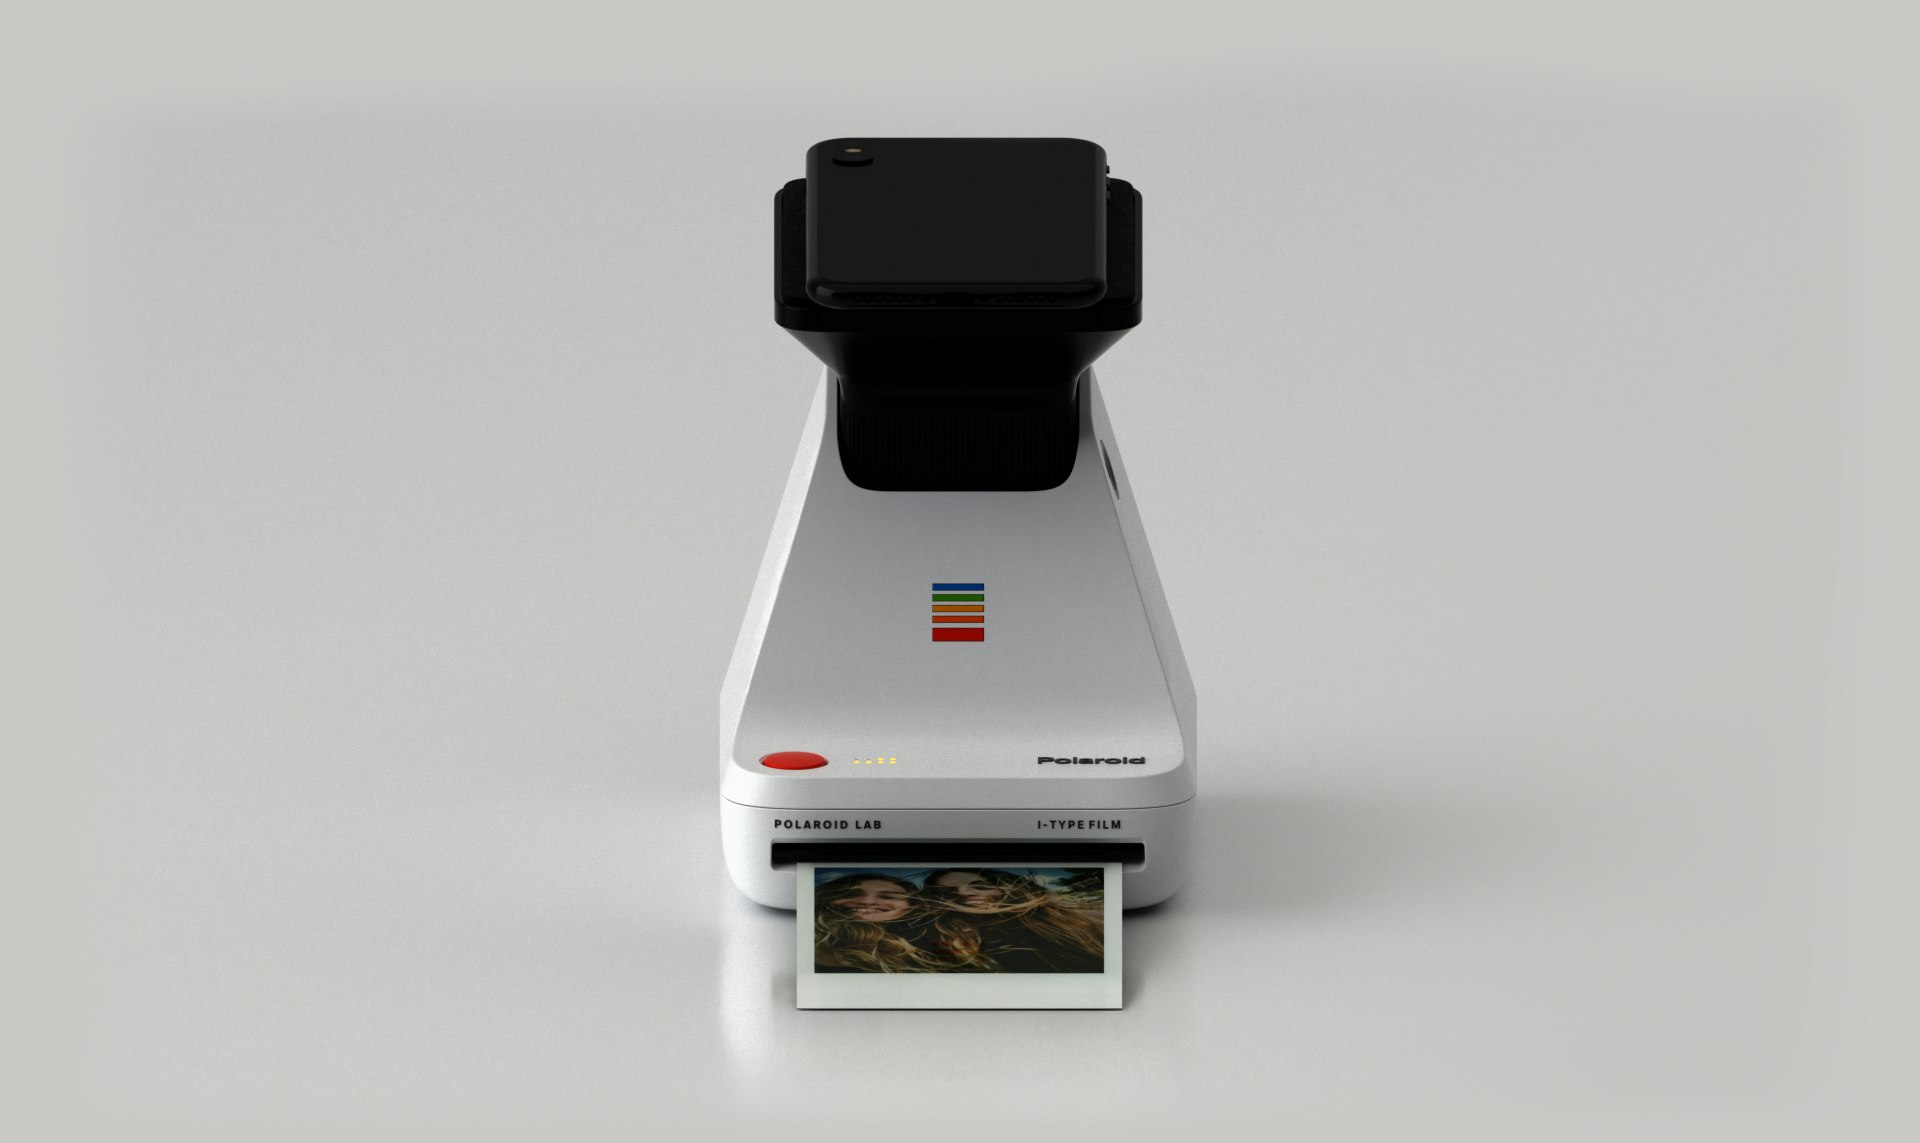 The Polaroid Lab printer, to which a smartphone can be attached. 